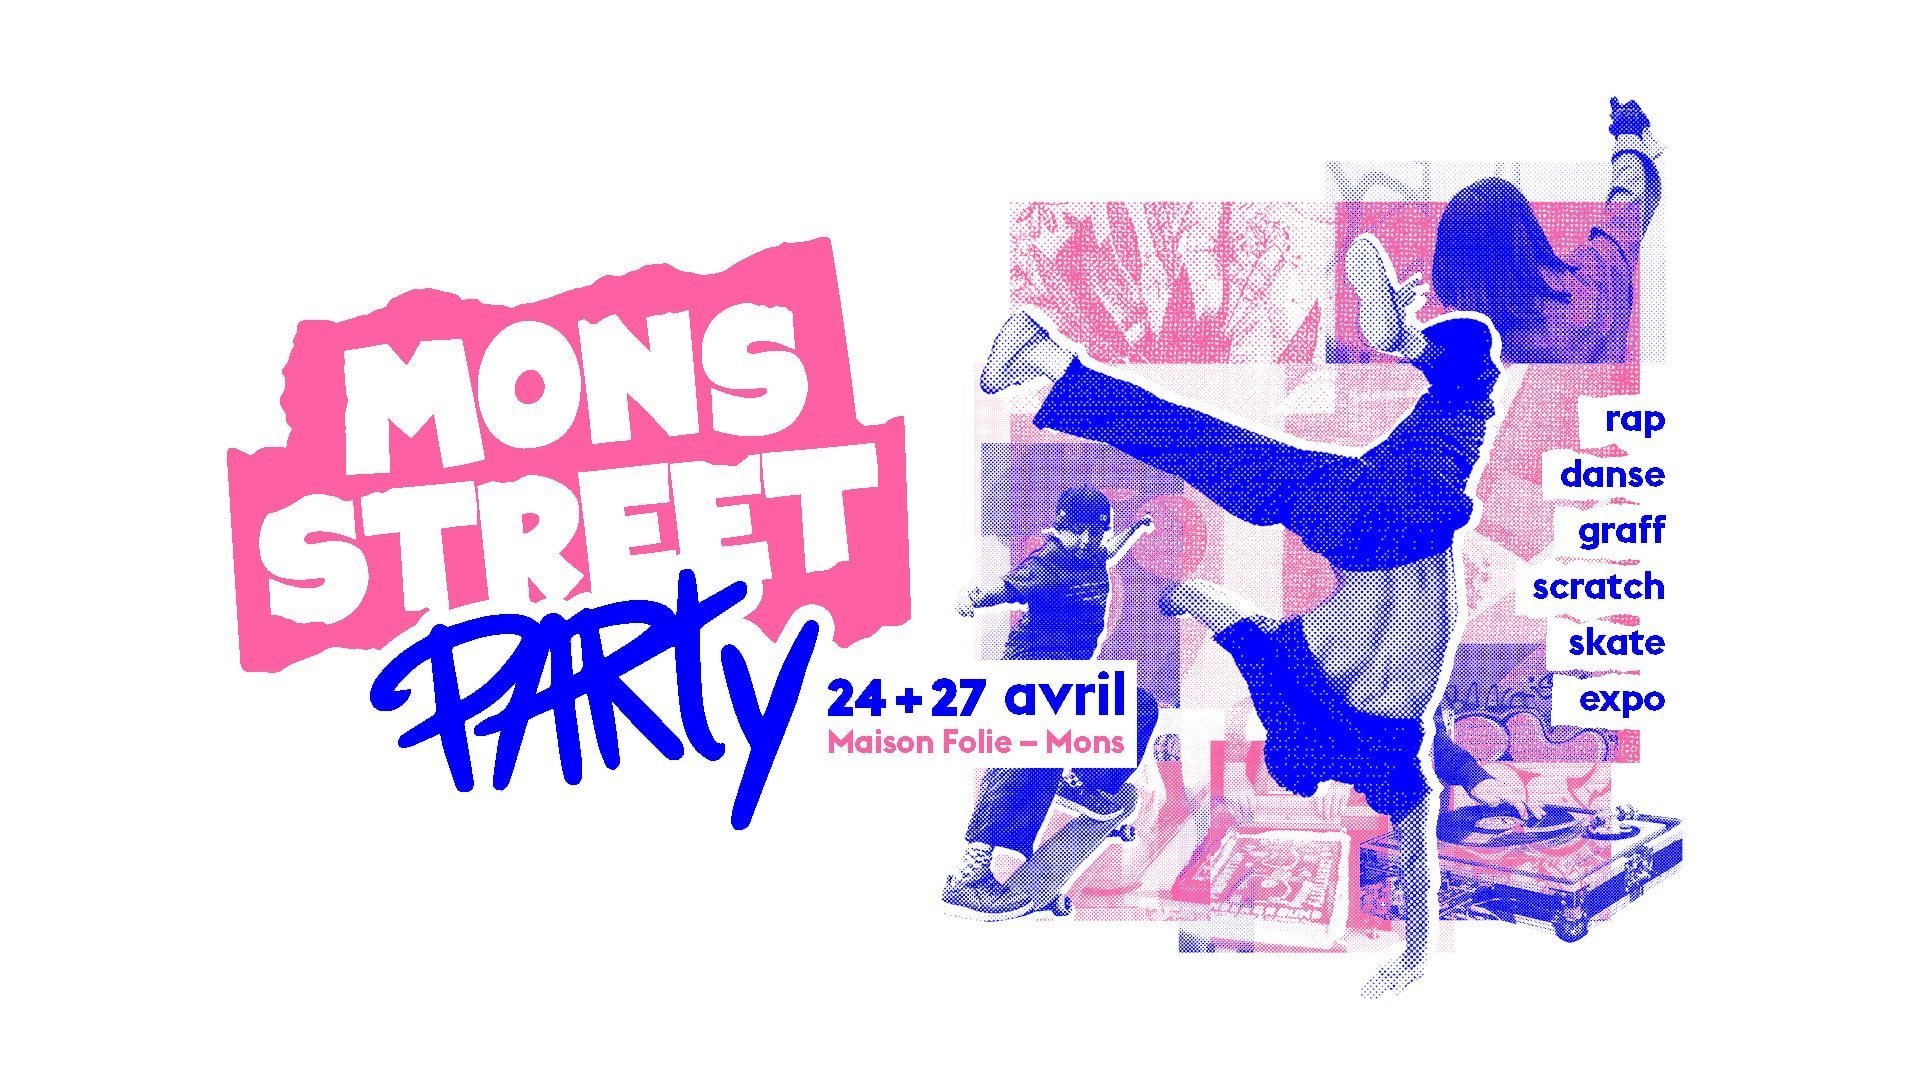 Mons Street Party